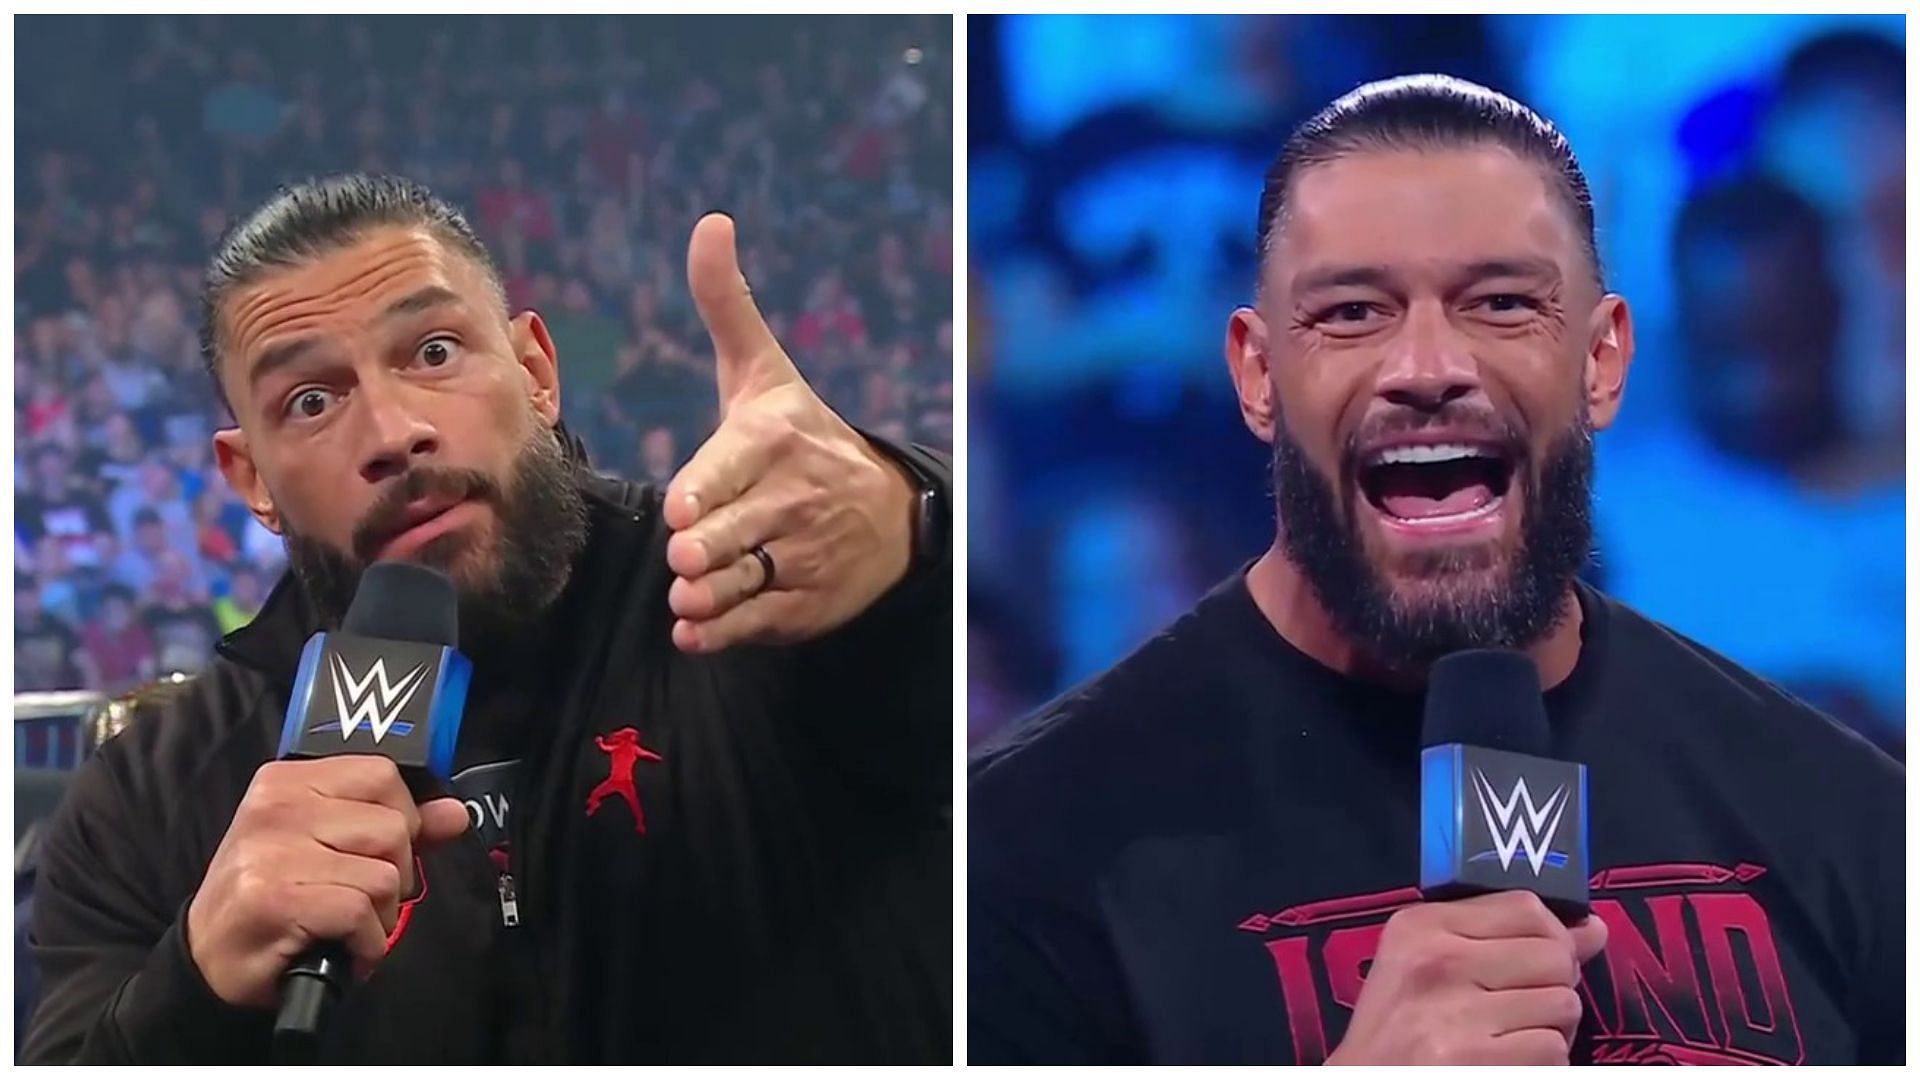 Roman Reigns will appear on upcoming WWE SmackDown.